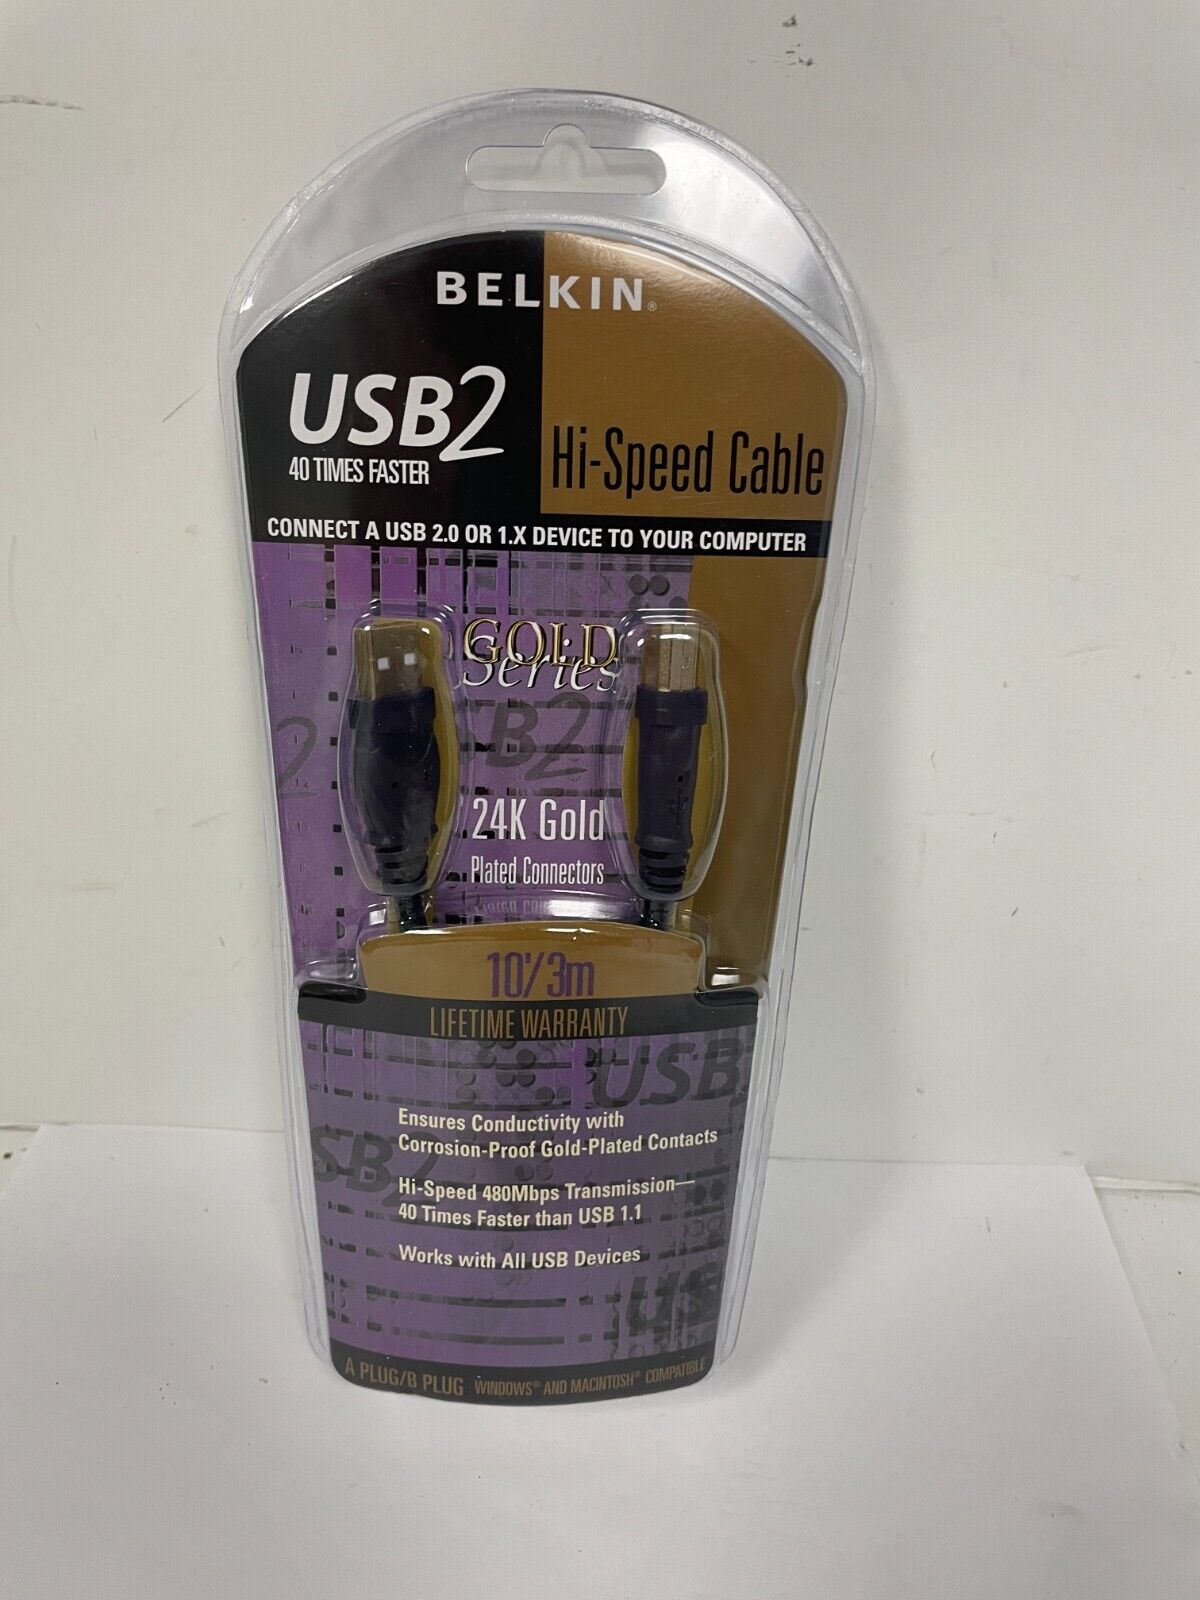 Belkin USB2 Hi-Speed Cable Gold Plated 24k Gold Series New NIB 10.3m Long